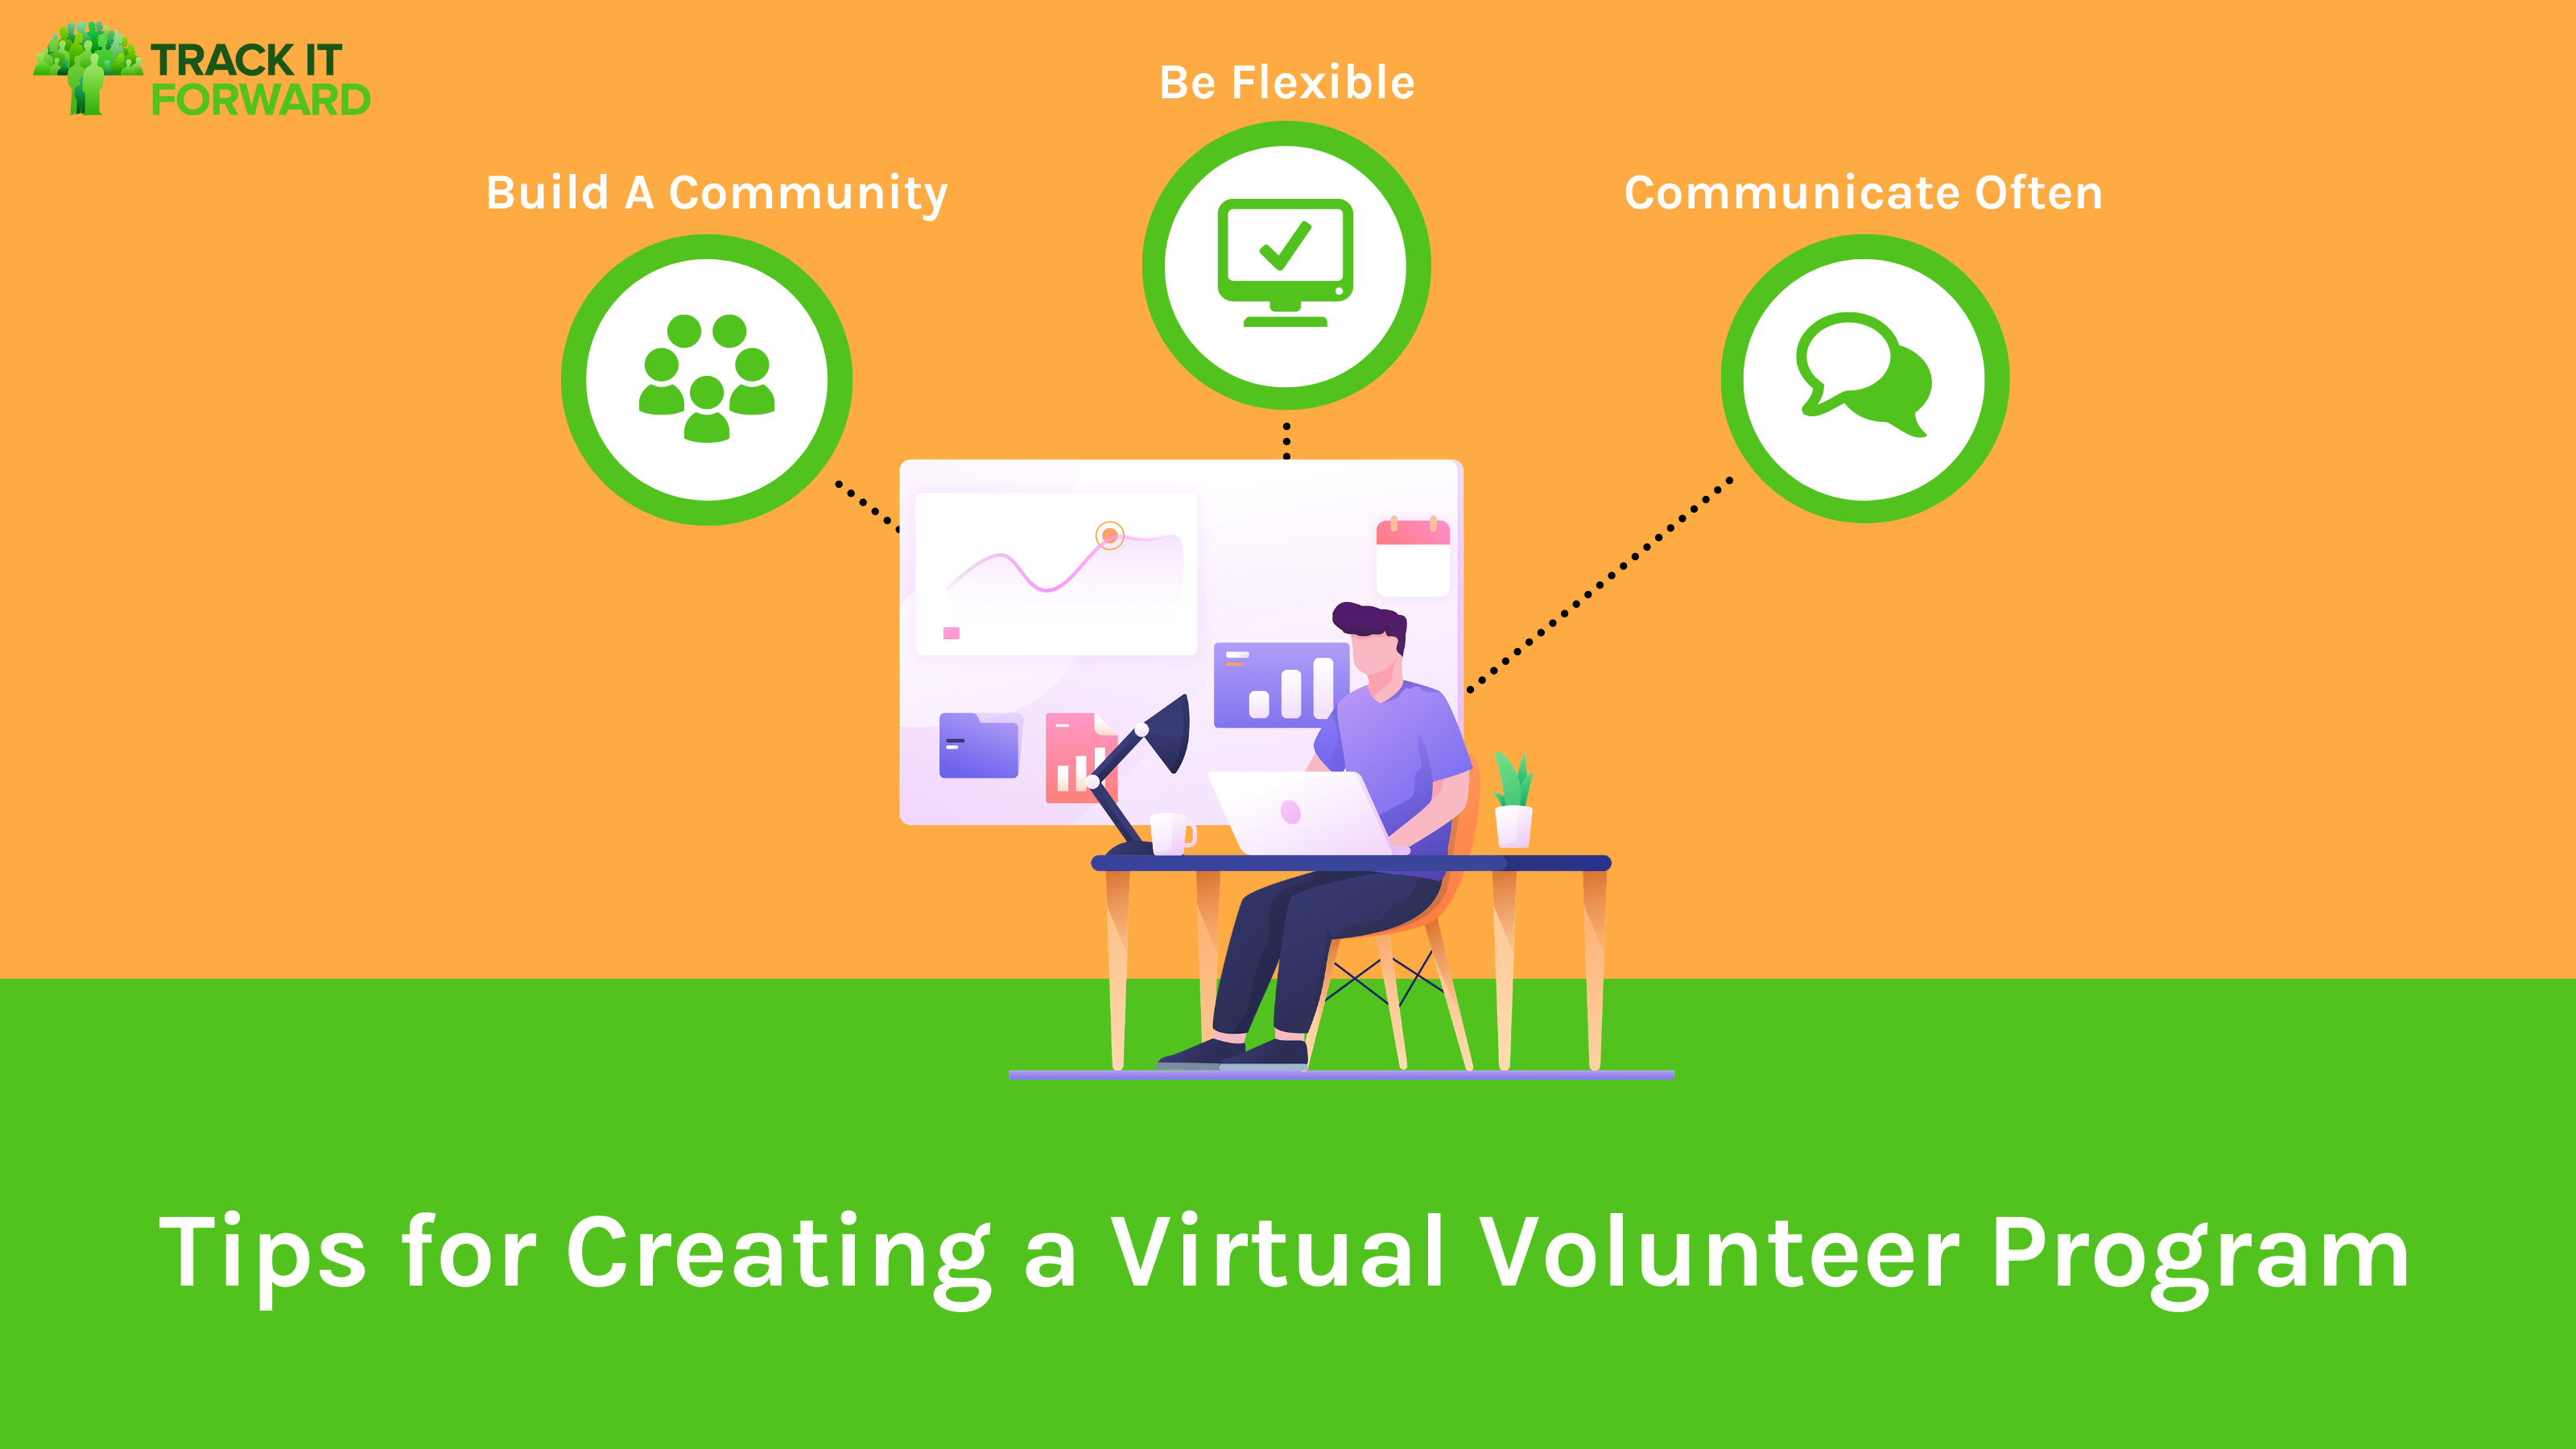 Infographic listing tips for creating a virtual volunteer program: Build a community, Be Flexible, and Communicate Often